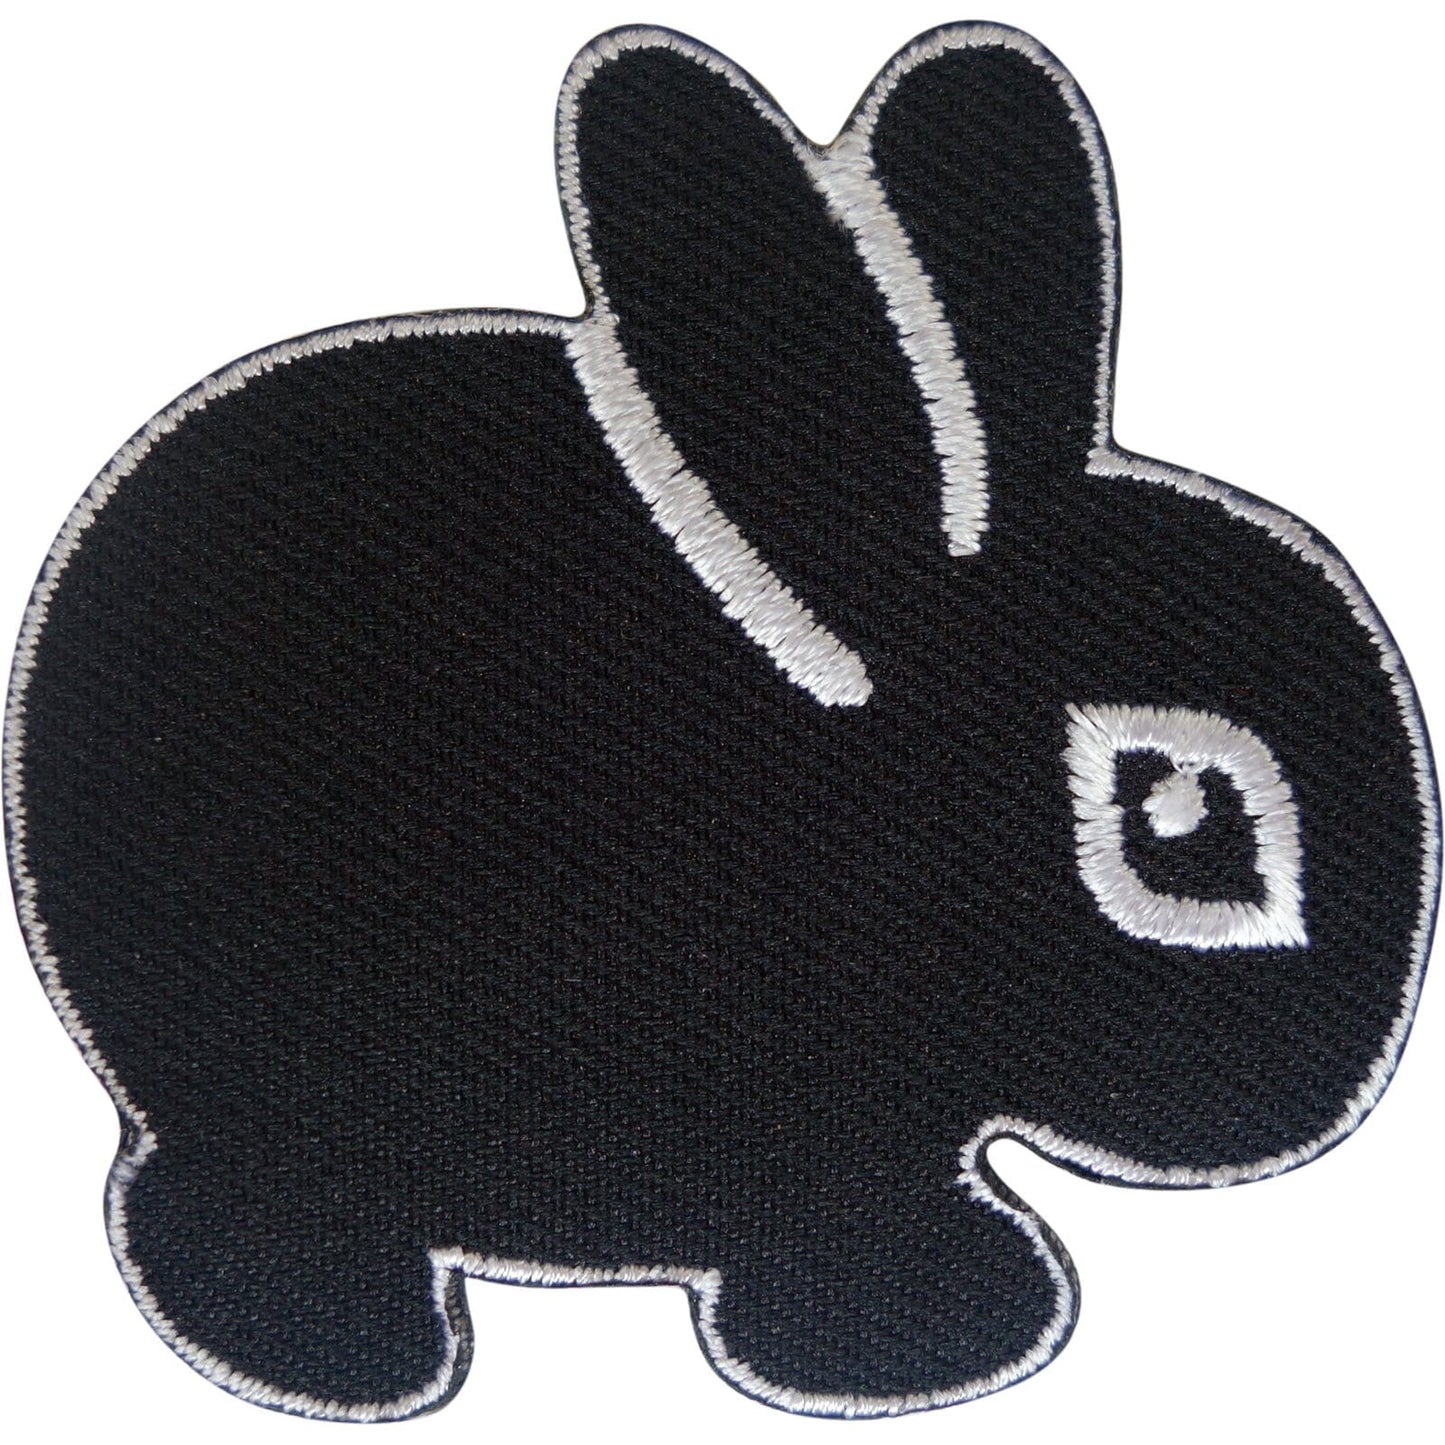 Rabbit Patch Iron On Sew On Clothes Bag Animal Embroidered Badge Crafts Applique